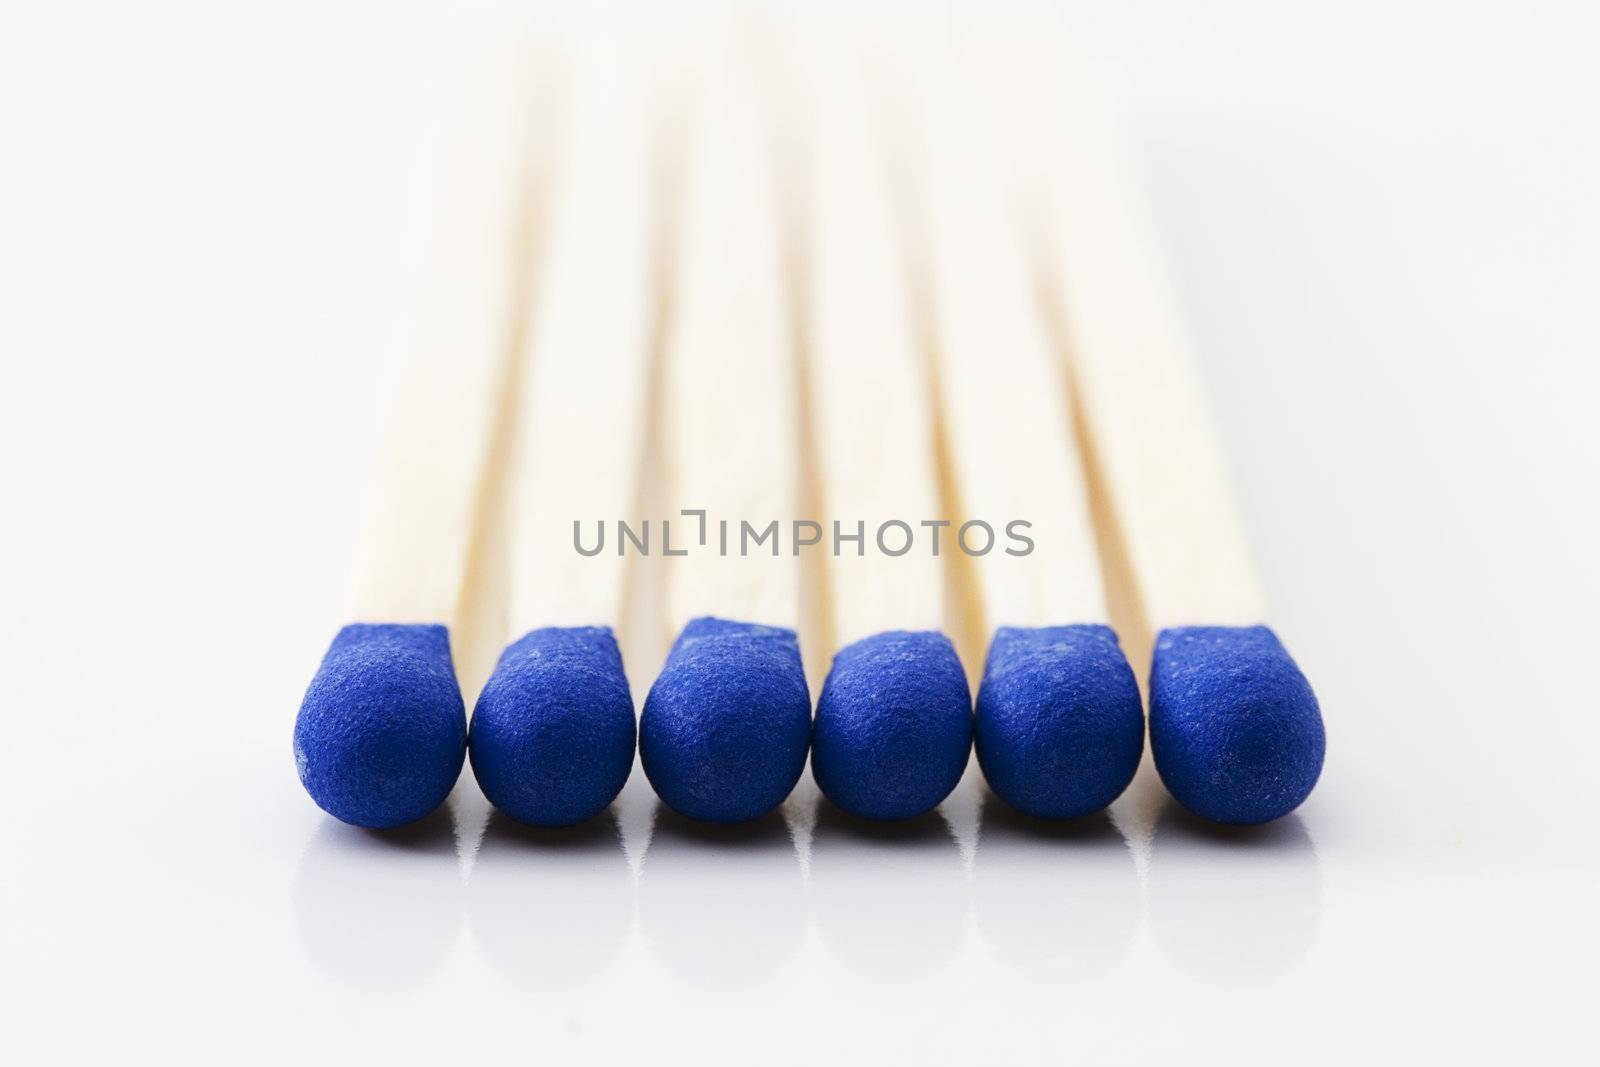 makro of some blue match heads on white background